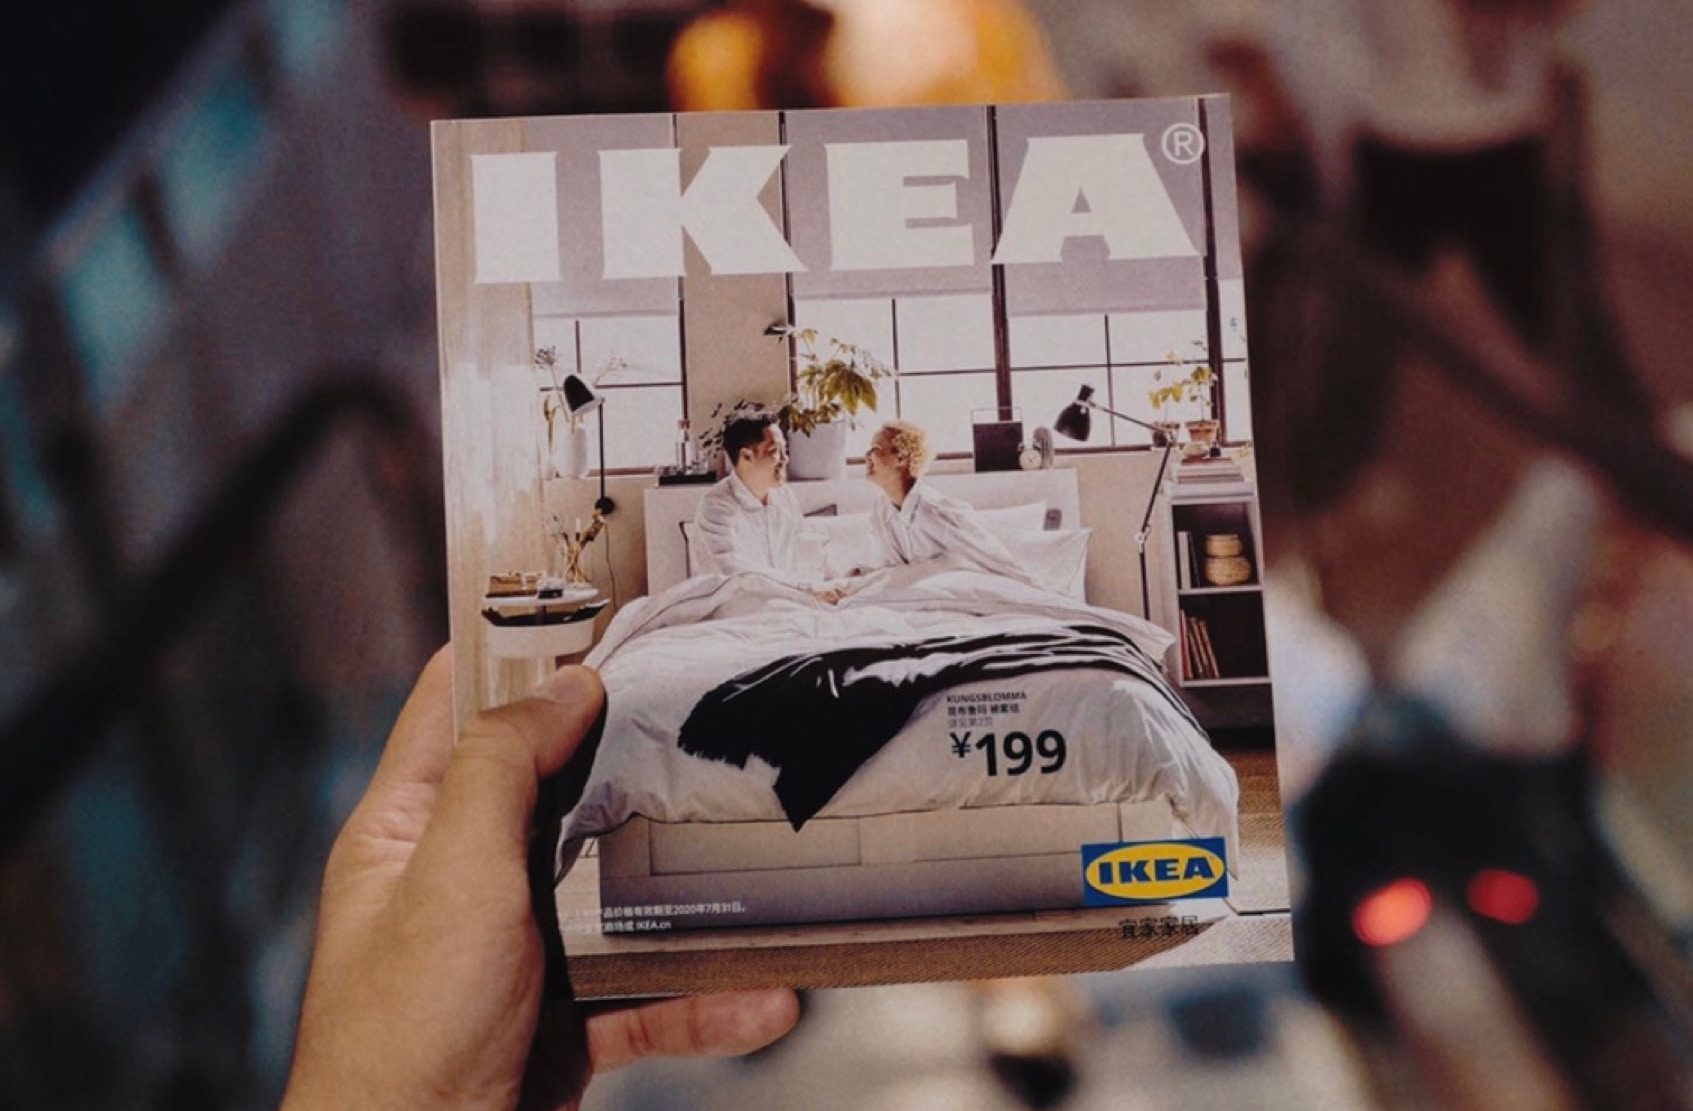 Saudi Arabia's Alsulaiman Group weighs IPO of IKEA business next year